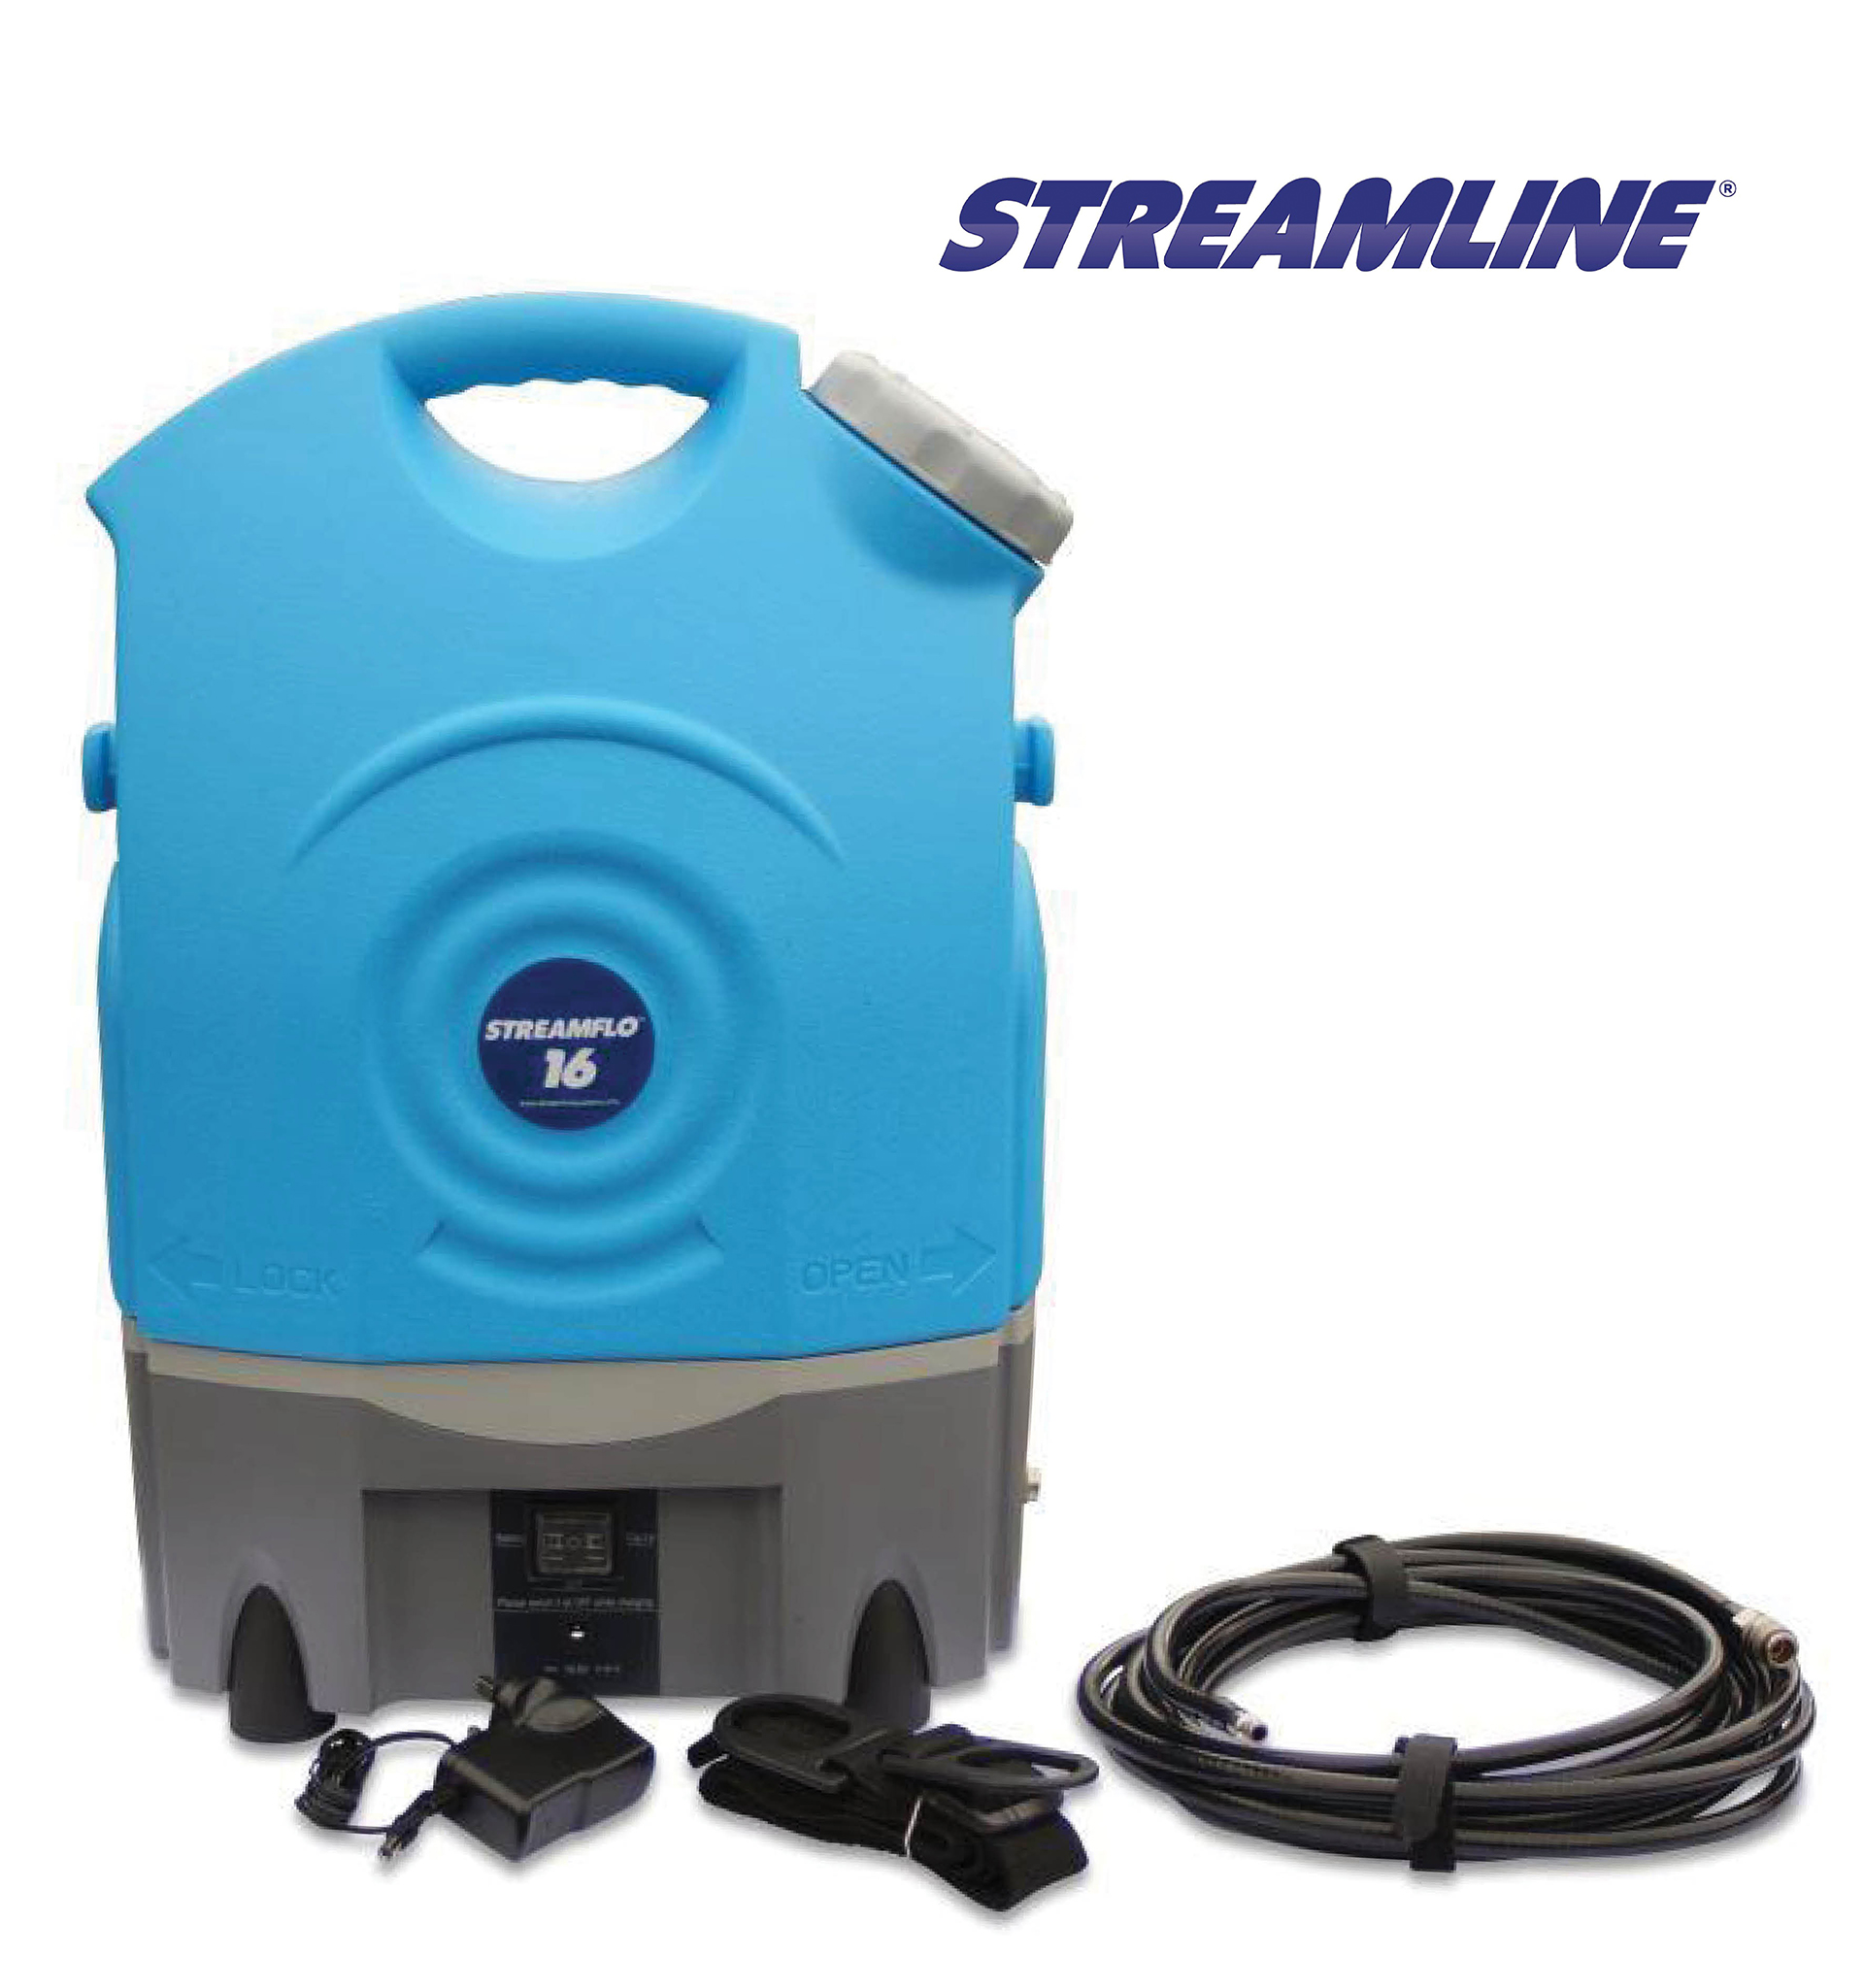 Streamflo-16 portable water delivery system